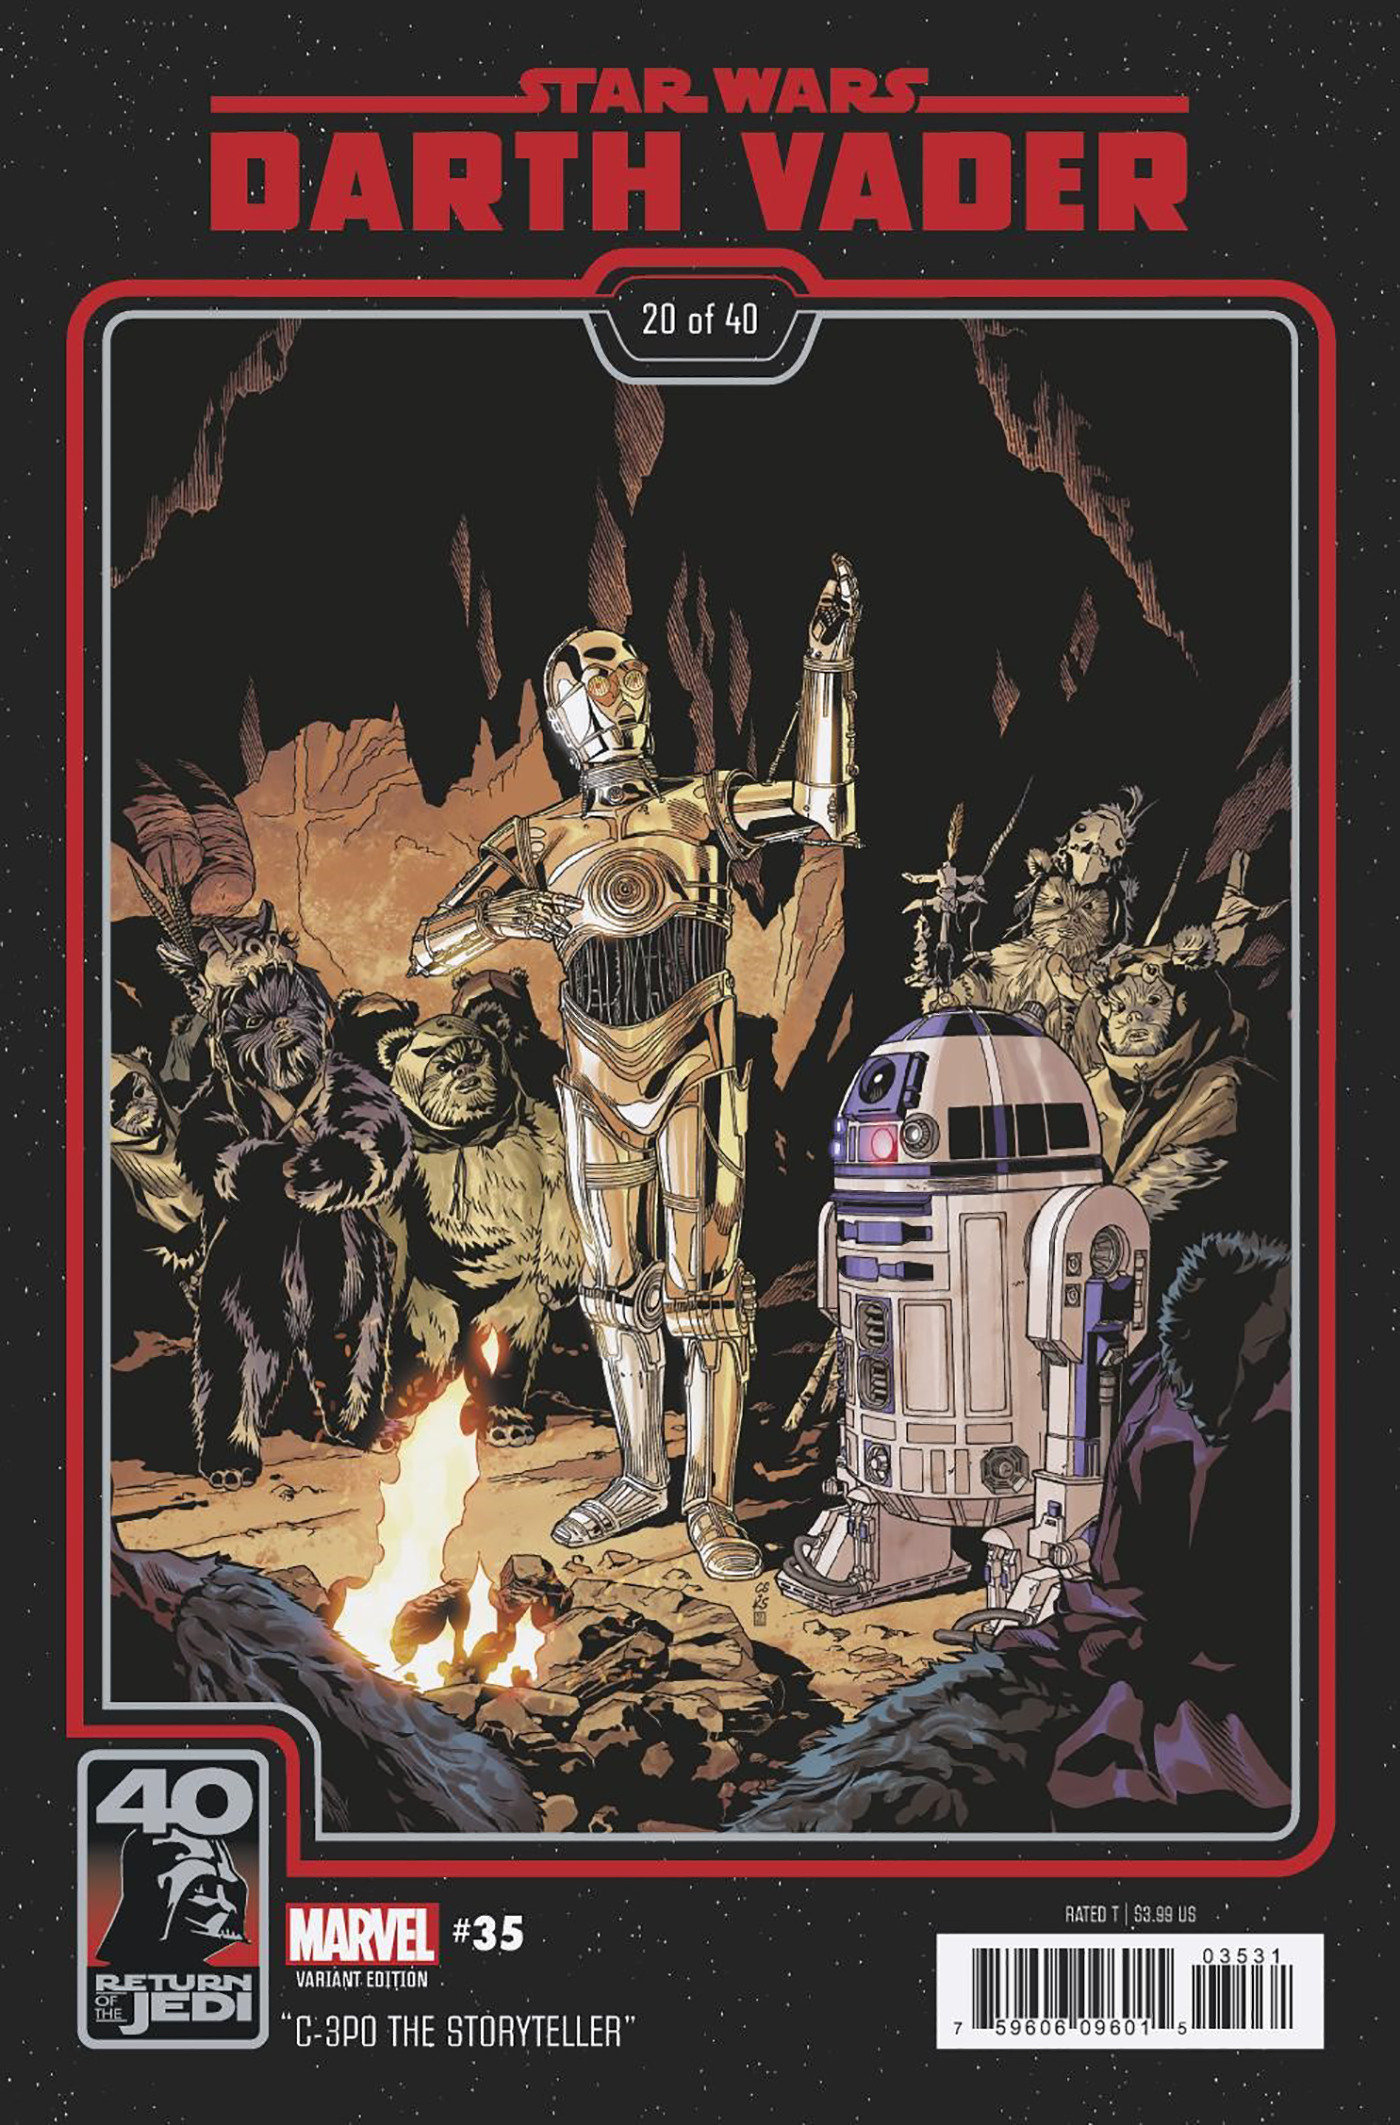 Star Wars: Darth Vader #35 Chris Sprouse Return of the Jedi 40th Anniversary Variant